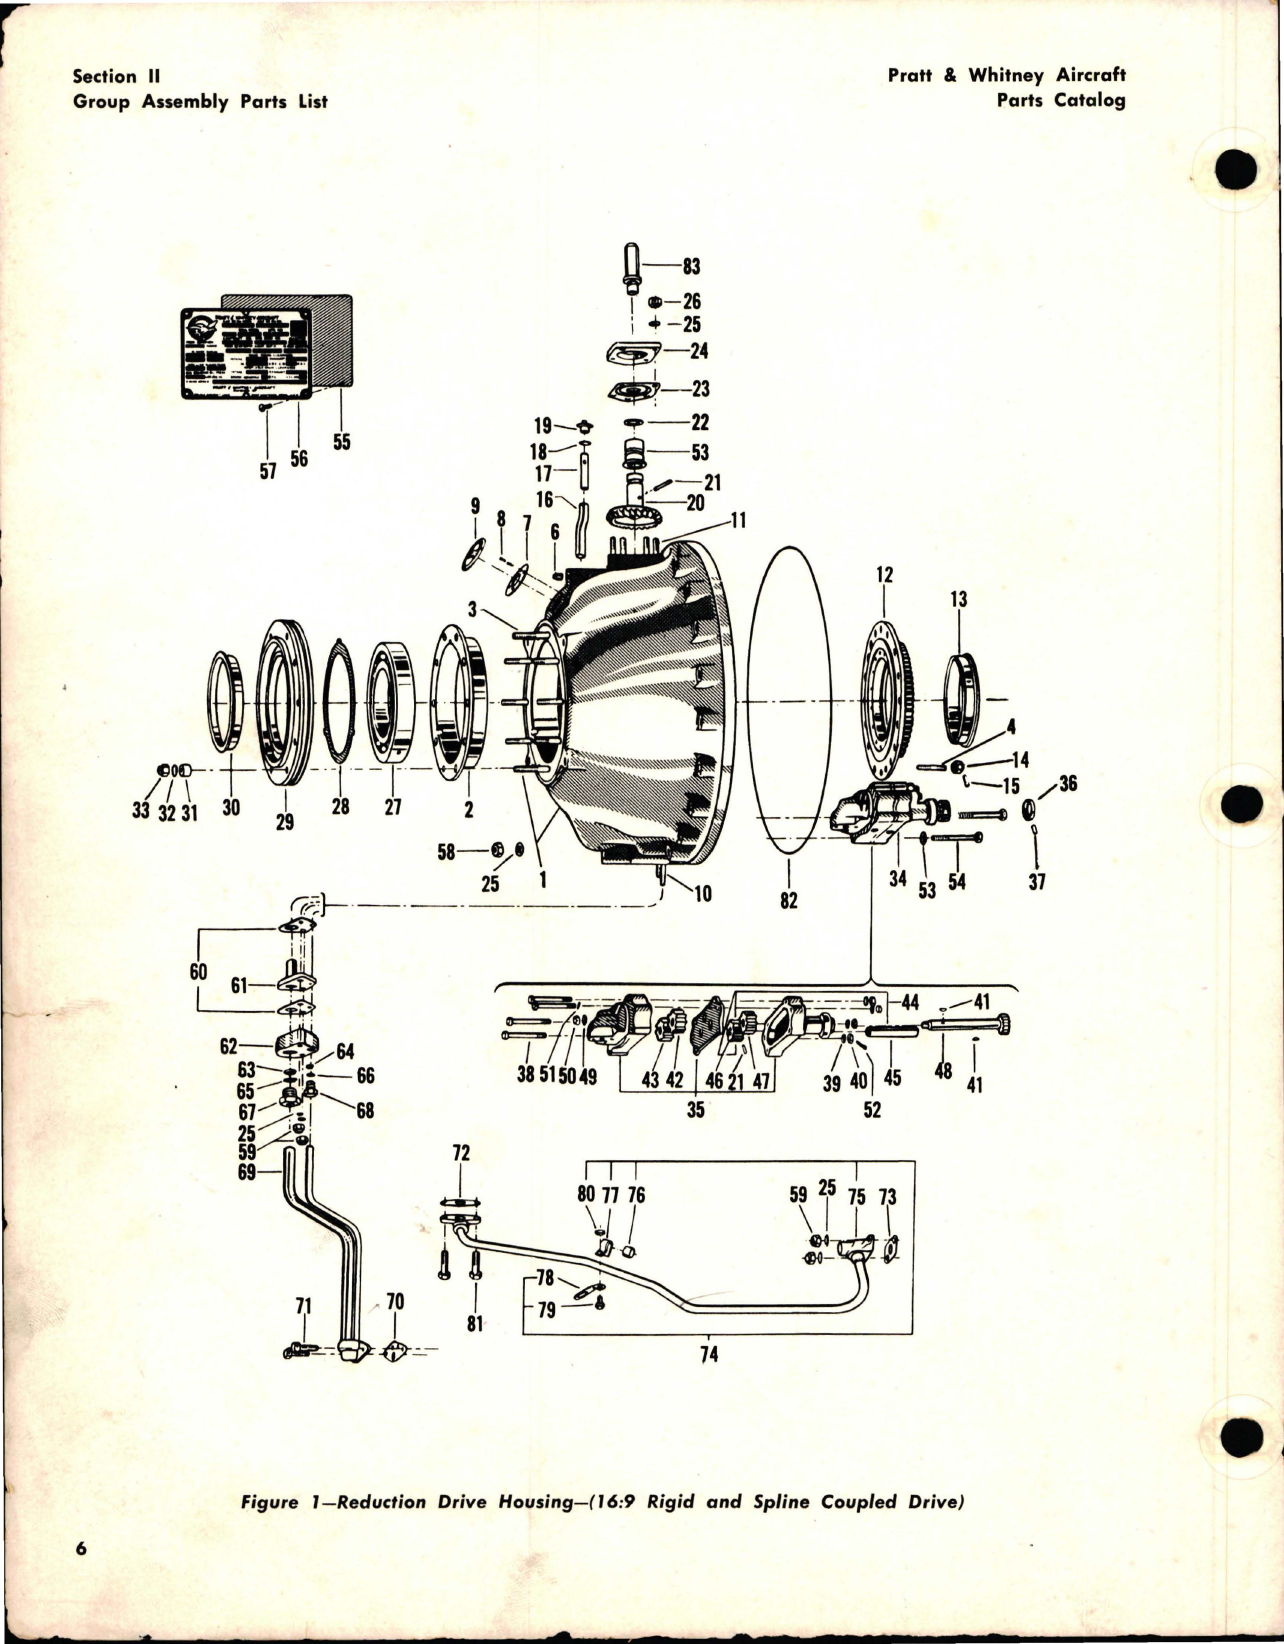 Sample page 7 from AirCorps Library document: Parts Catalog for Twin Wasp Model R-1830-C3G & -92 Pratt & Whitney Engines